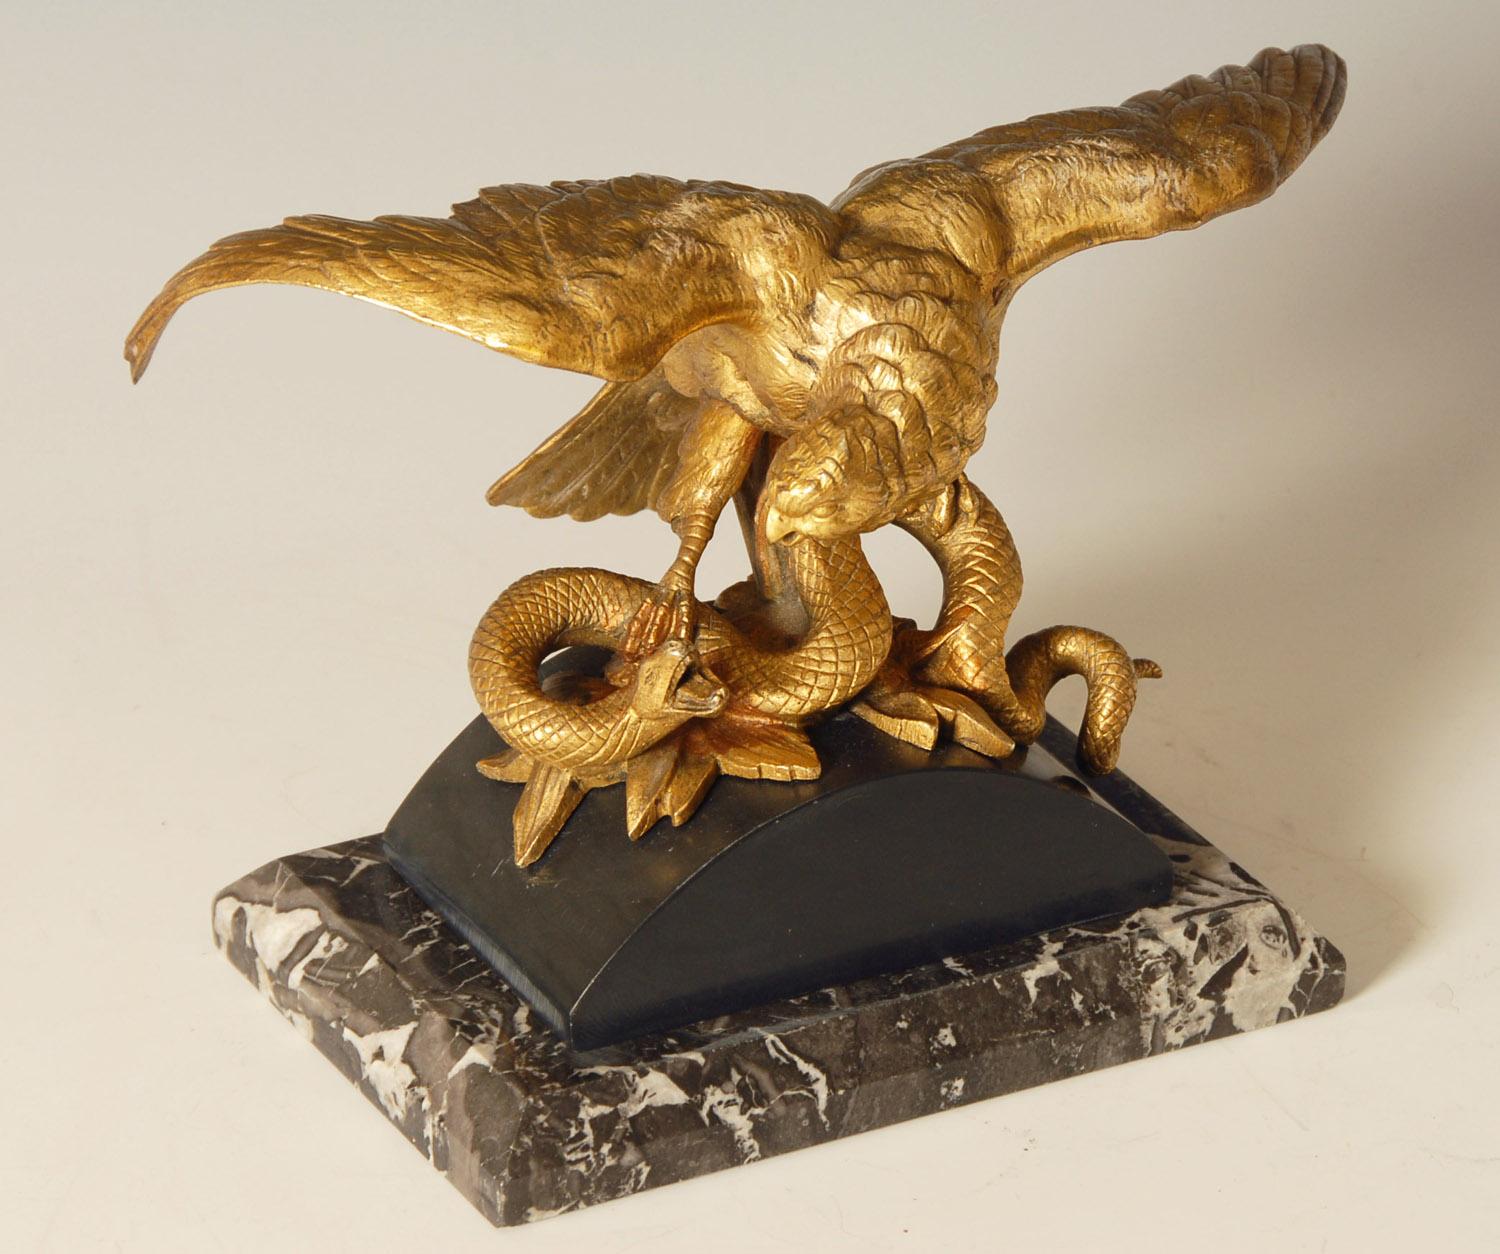 Stunning 19th century French ormolu on bronze study of an eagle attacking a snake on a marble base.
Very fine quality, measures: 6.5 inches high x 10 inches wide, weighing 3.7 kilos, a perfect desk accessory.

Price includes free shipping to